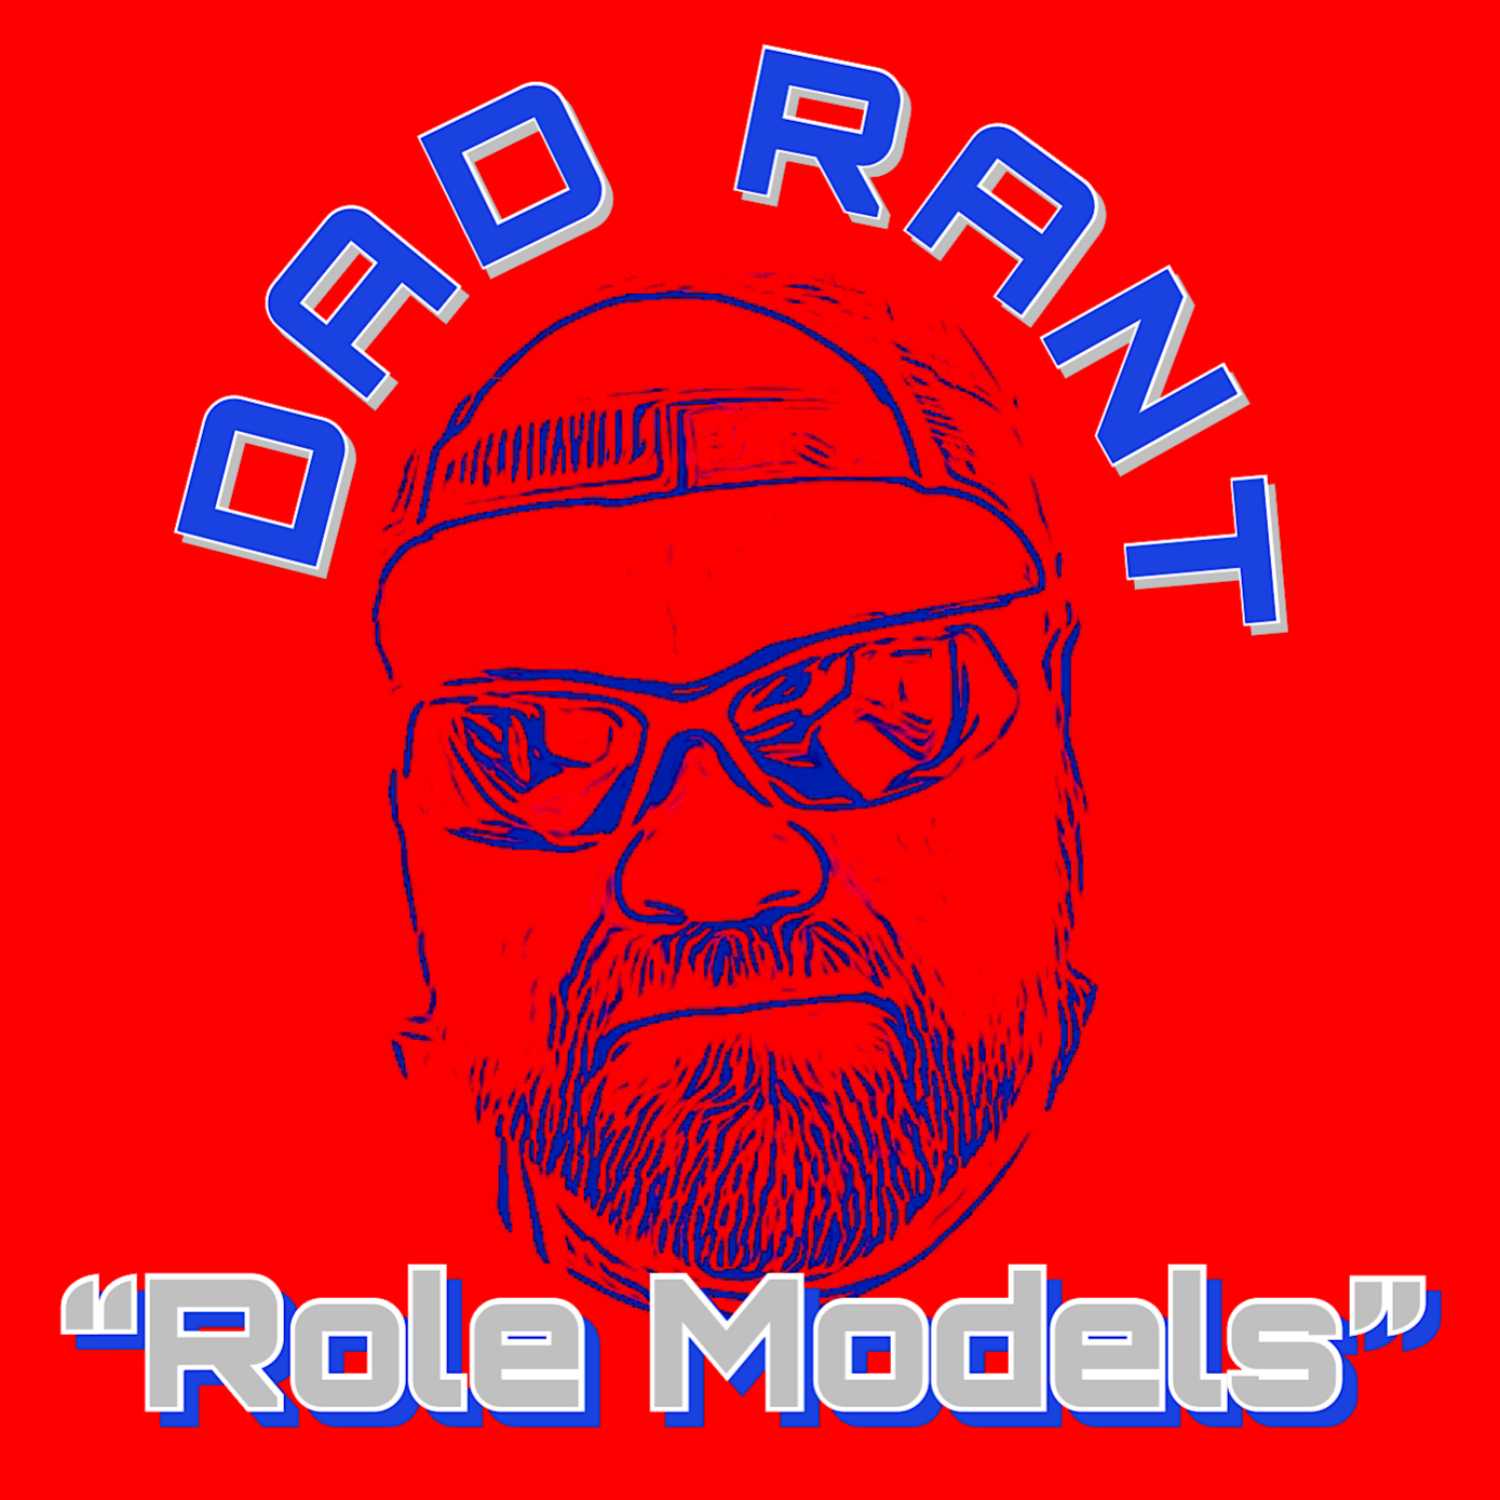 The Dad Code Podcast: DAD RANT-- "Role Models"